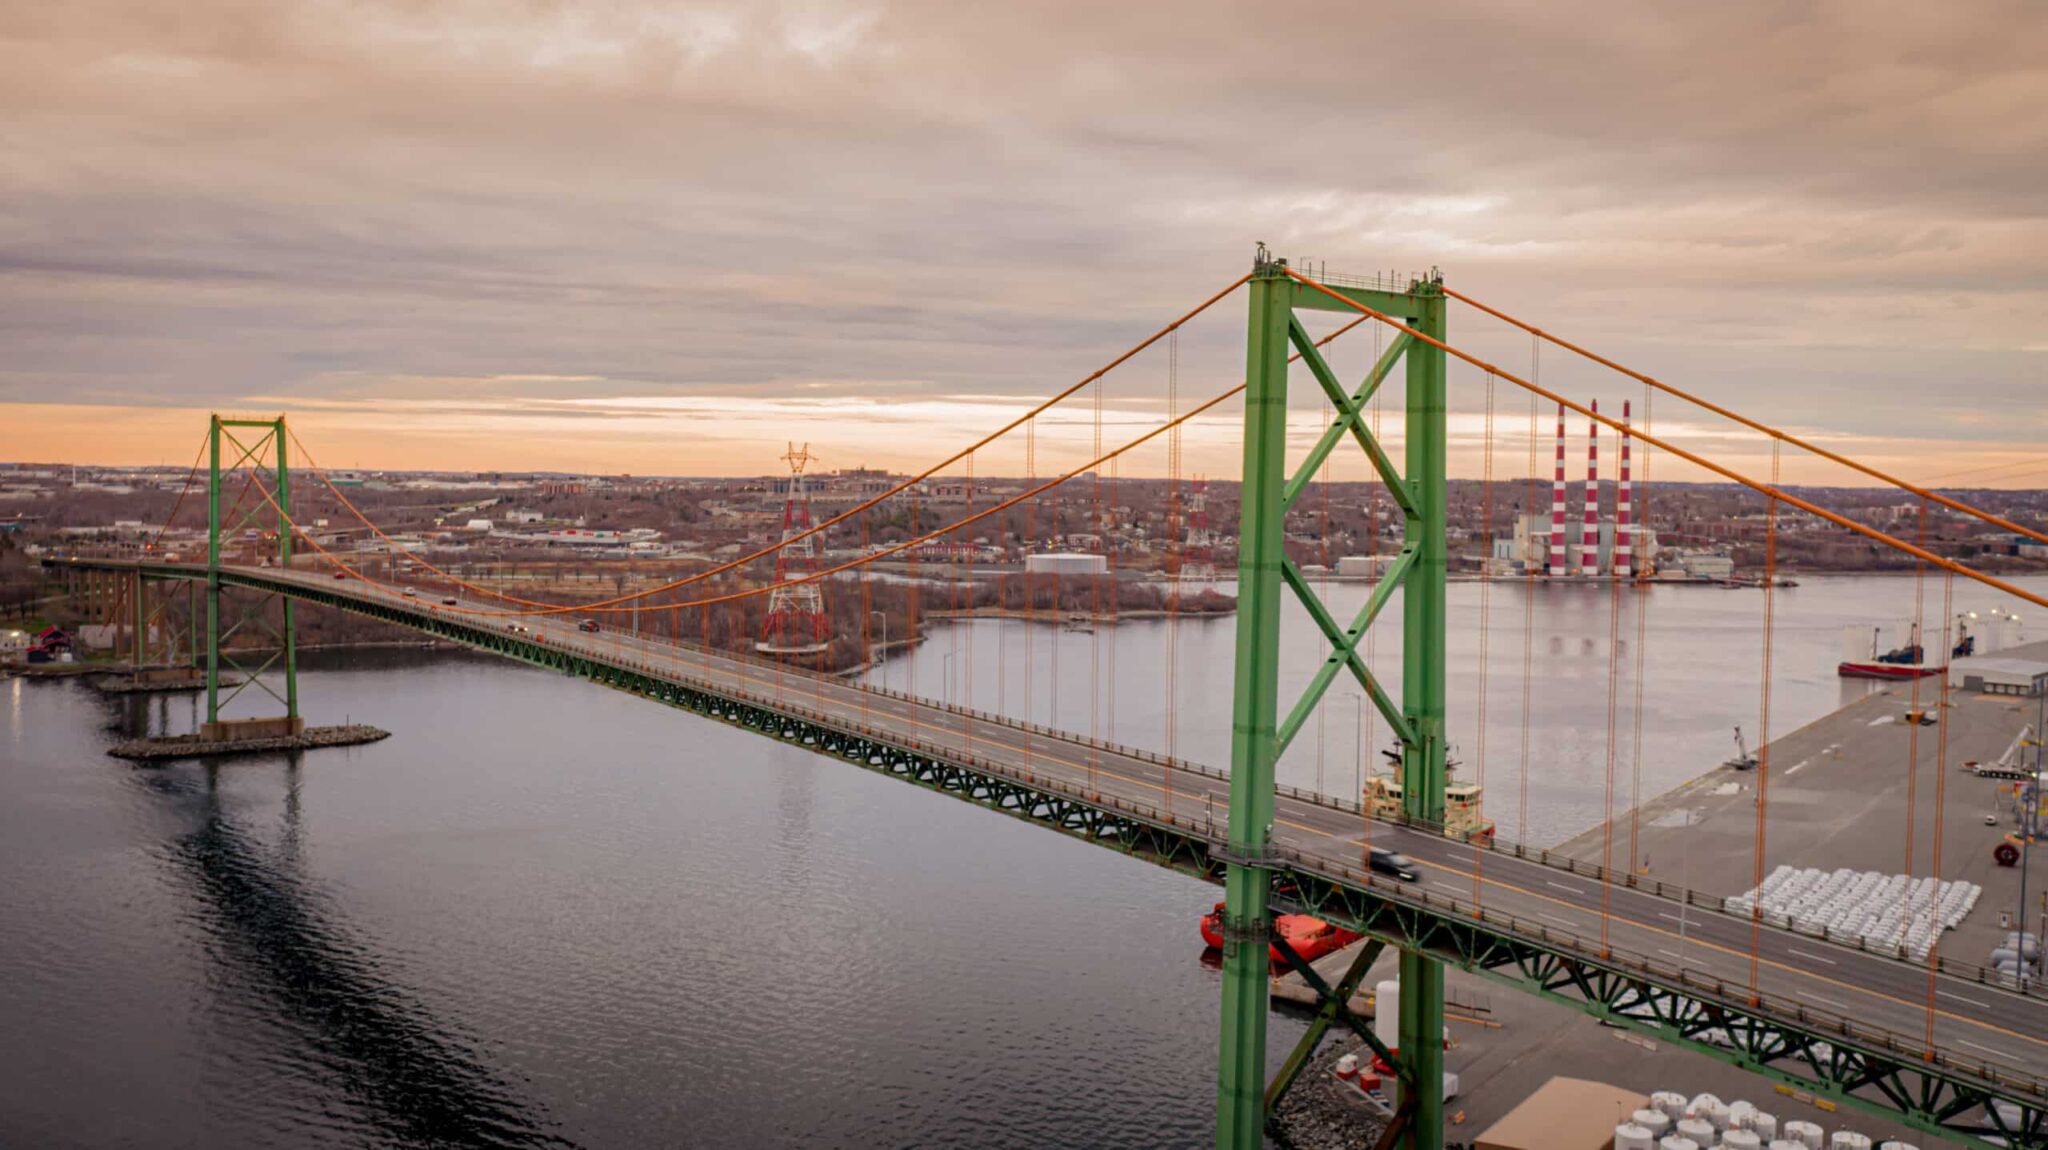 The Macdonald Bridge is seen spanning Halifax Harbour, with the red-and-white striped towers of Tufft's Cove in the background.